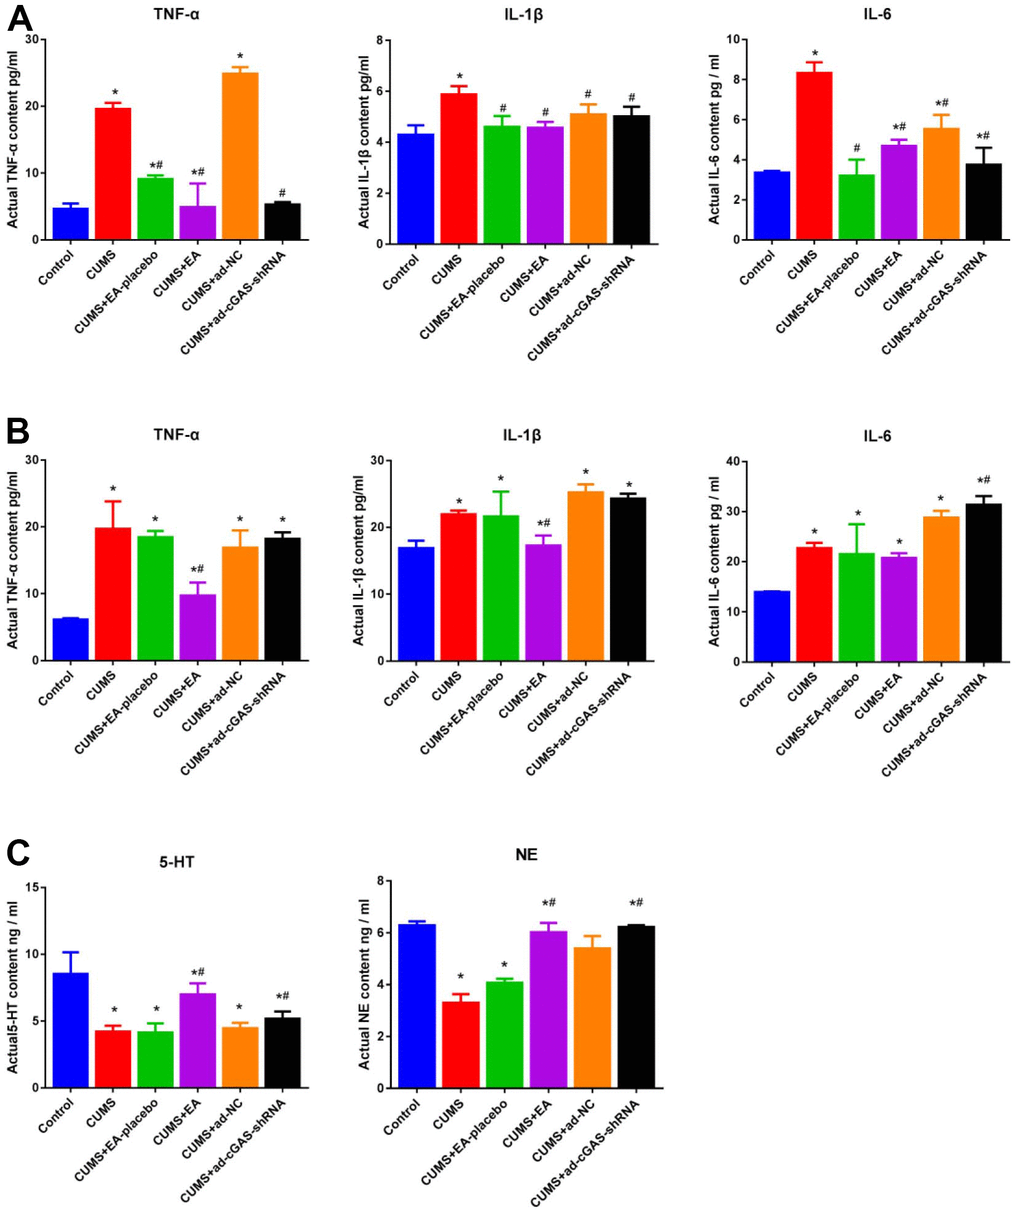 The impact of EA and knockdown of cGAS on the production of inflammatory factors and monoamines in depressed mice. (A) The concentration of TNF-α, IL-1β, and IL-6 in the serum was measured by ELISA. (B) The concentration of TNF-α, IL-1β, and IL-6 in the hippocampus was measured by ELISA. (C) The release of 5-HT and NE in the hippocampus was determined by ELISA (*p